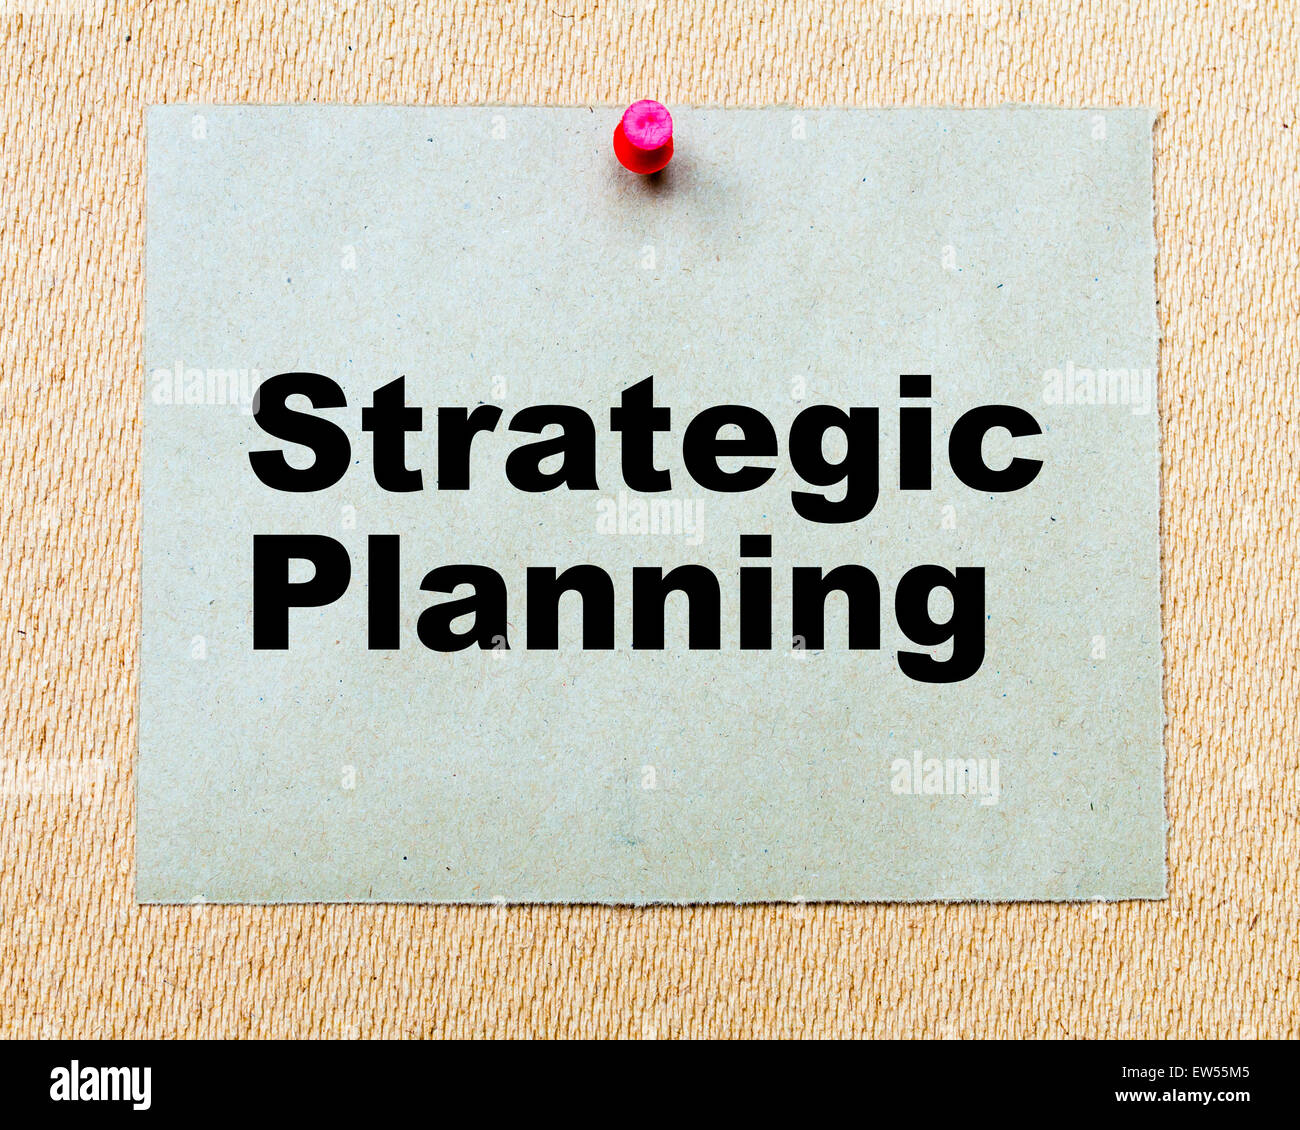 Strategic Planning written on paper note pinned with red thumbtack on wooden board. Business conceptual Image Stock Photo